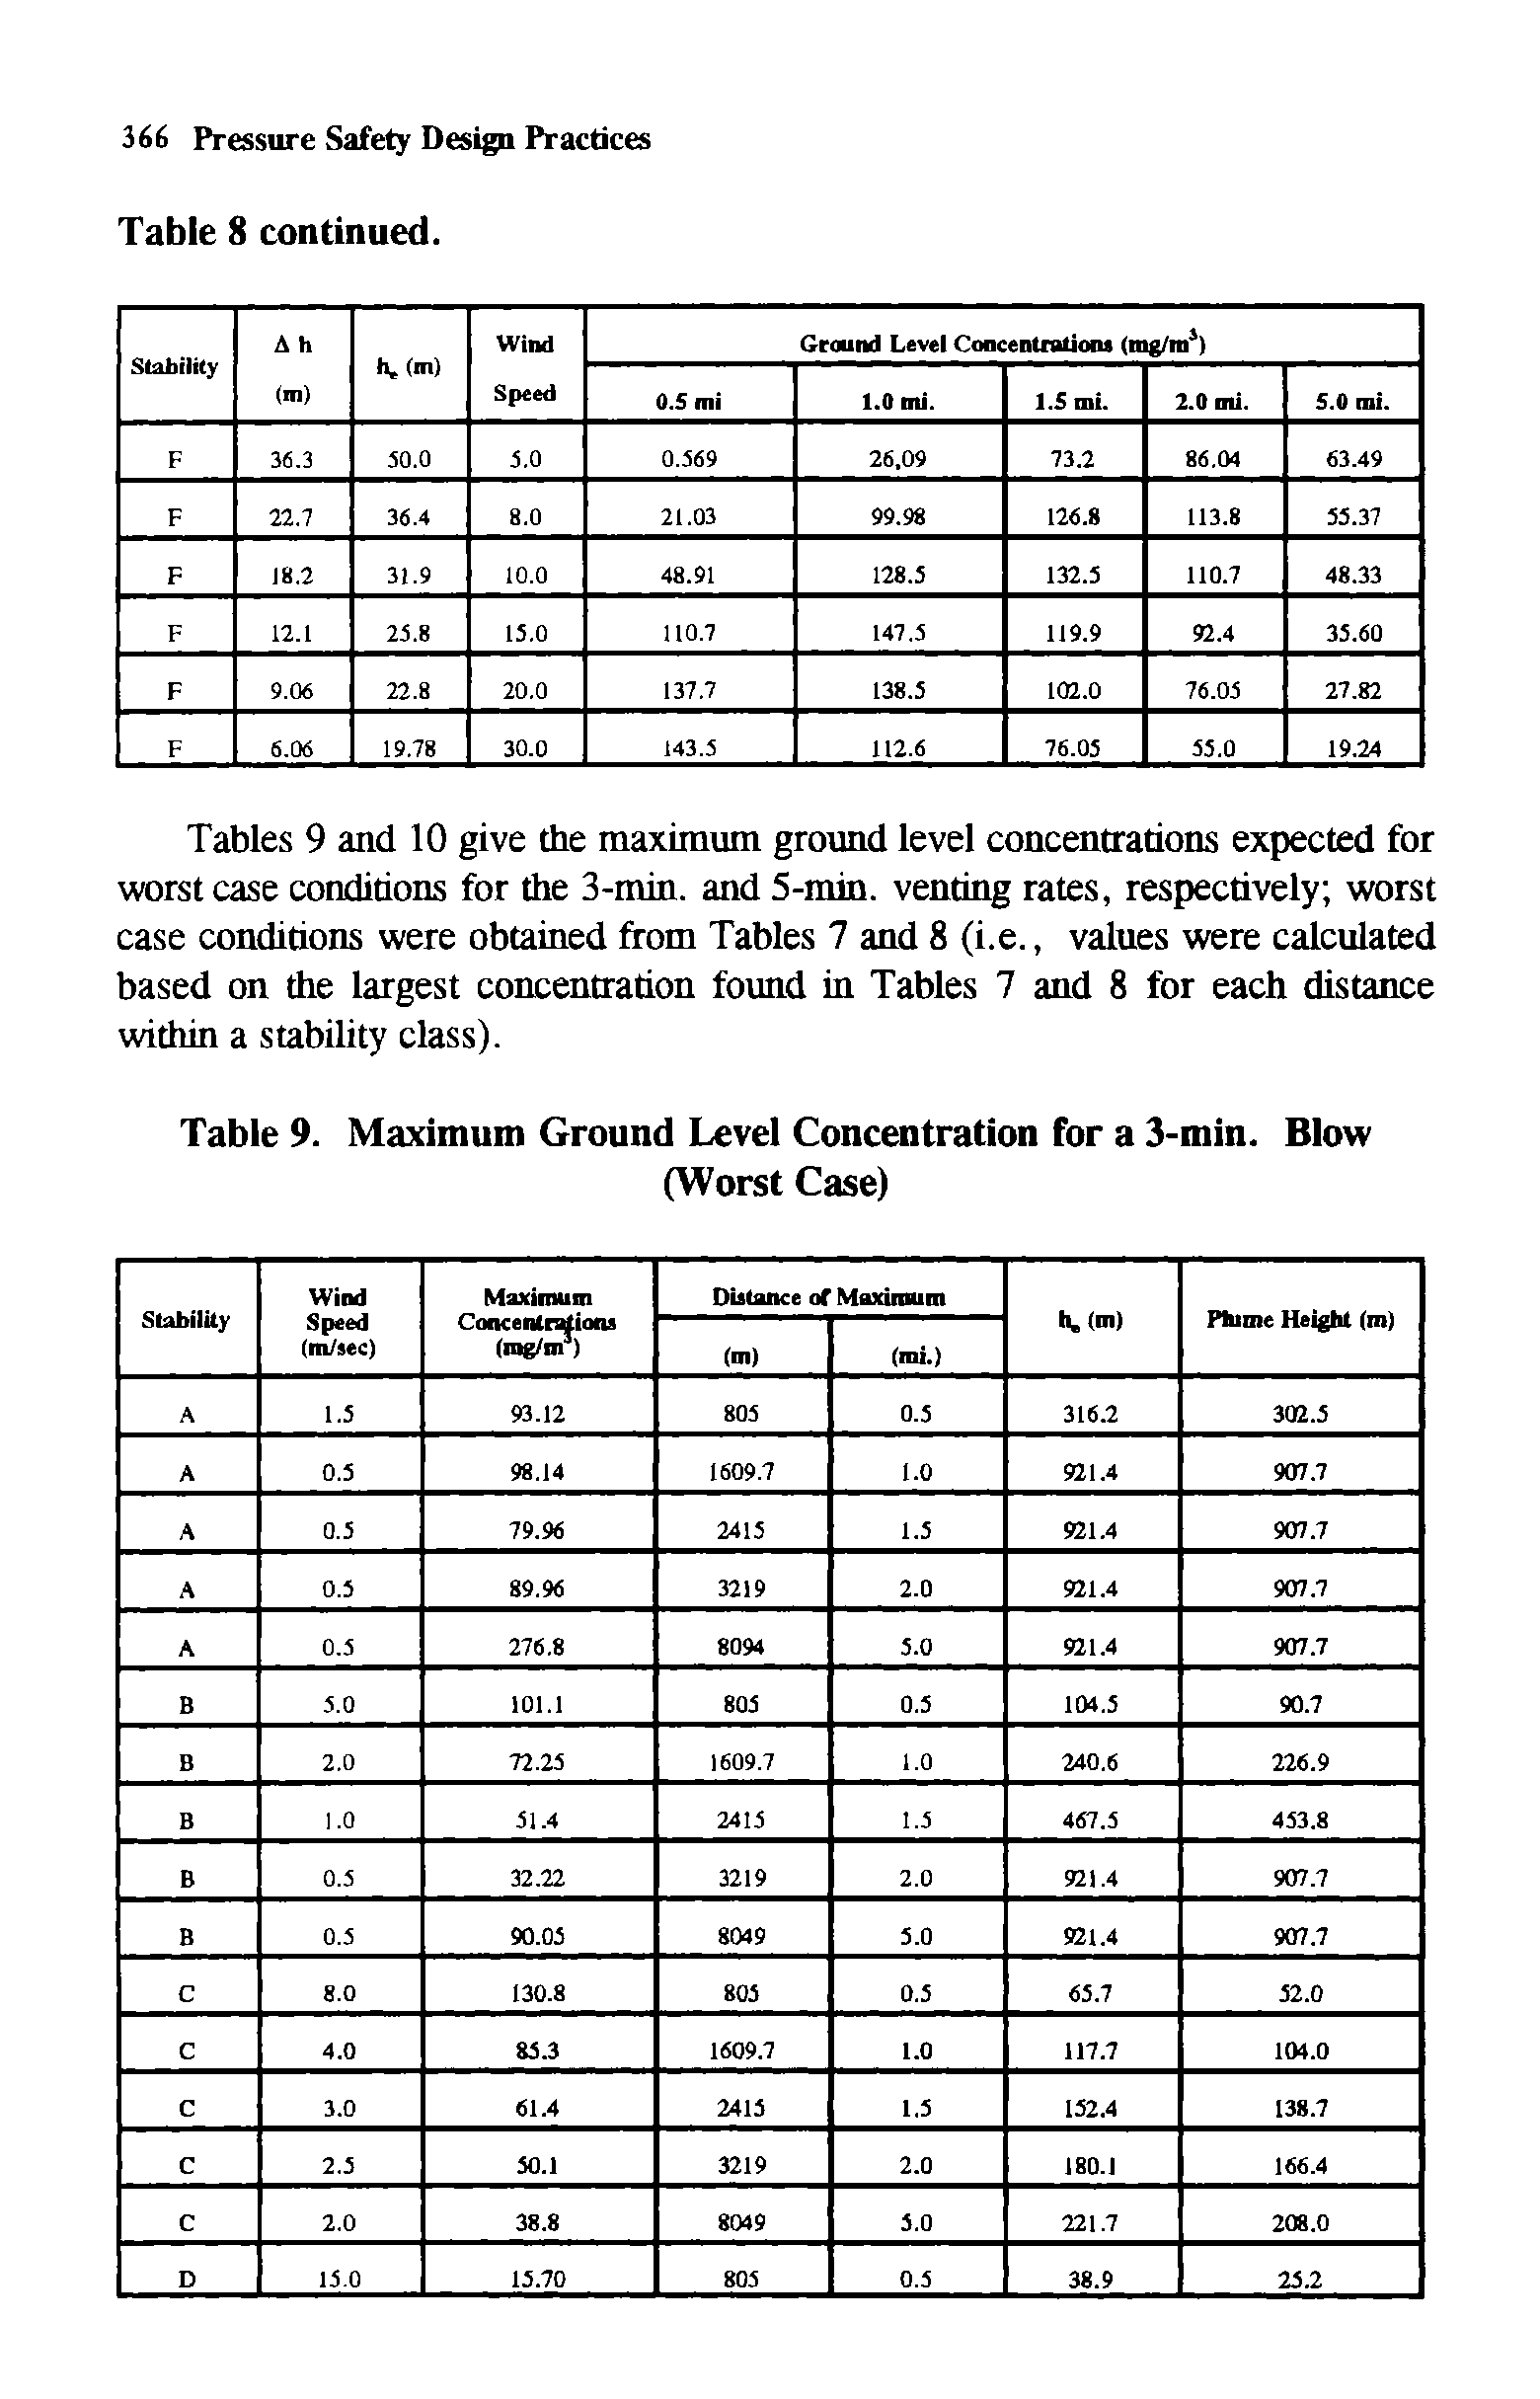 Tables 9 and 10 give the maximum ground level concentrations expected for worst case conditions for the 3-min. and 5-min. venting rates, respectively worst case conditions were obtained from Tables 7 and 8 (i.e., values were calculated based on the largest concentration found in Tables 7 and 8 for each distance within a stability class).